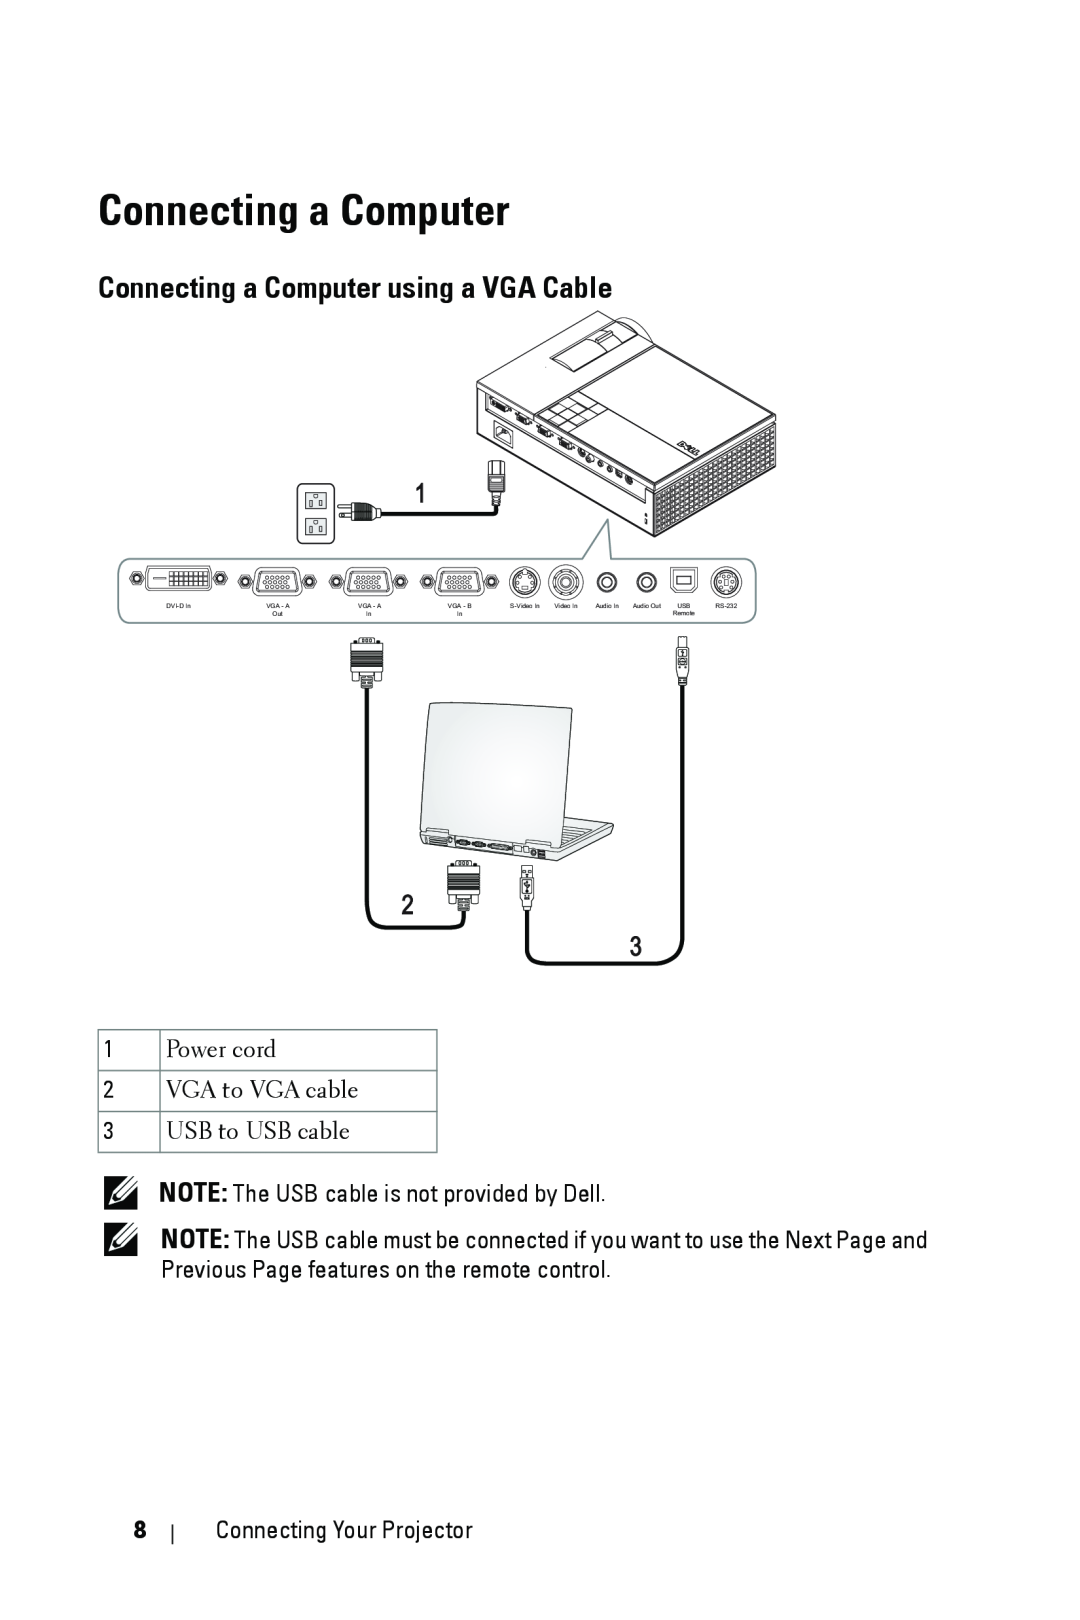 Dell 1409X manual Connecting a Computer using a VGA Cable, NOTE The USB cable is not provided by Dell 